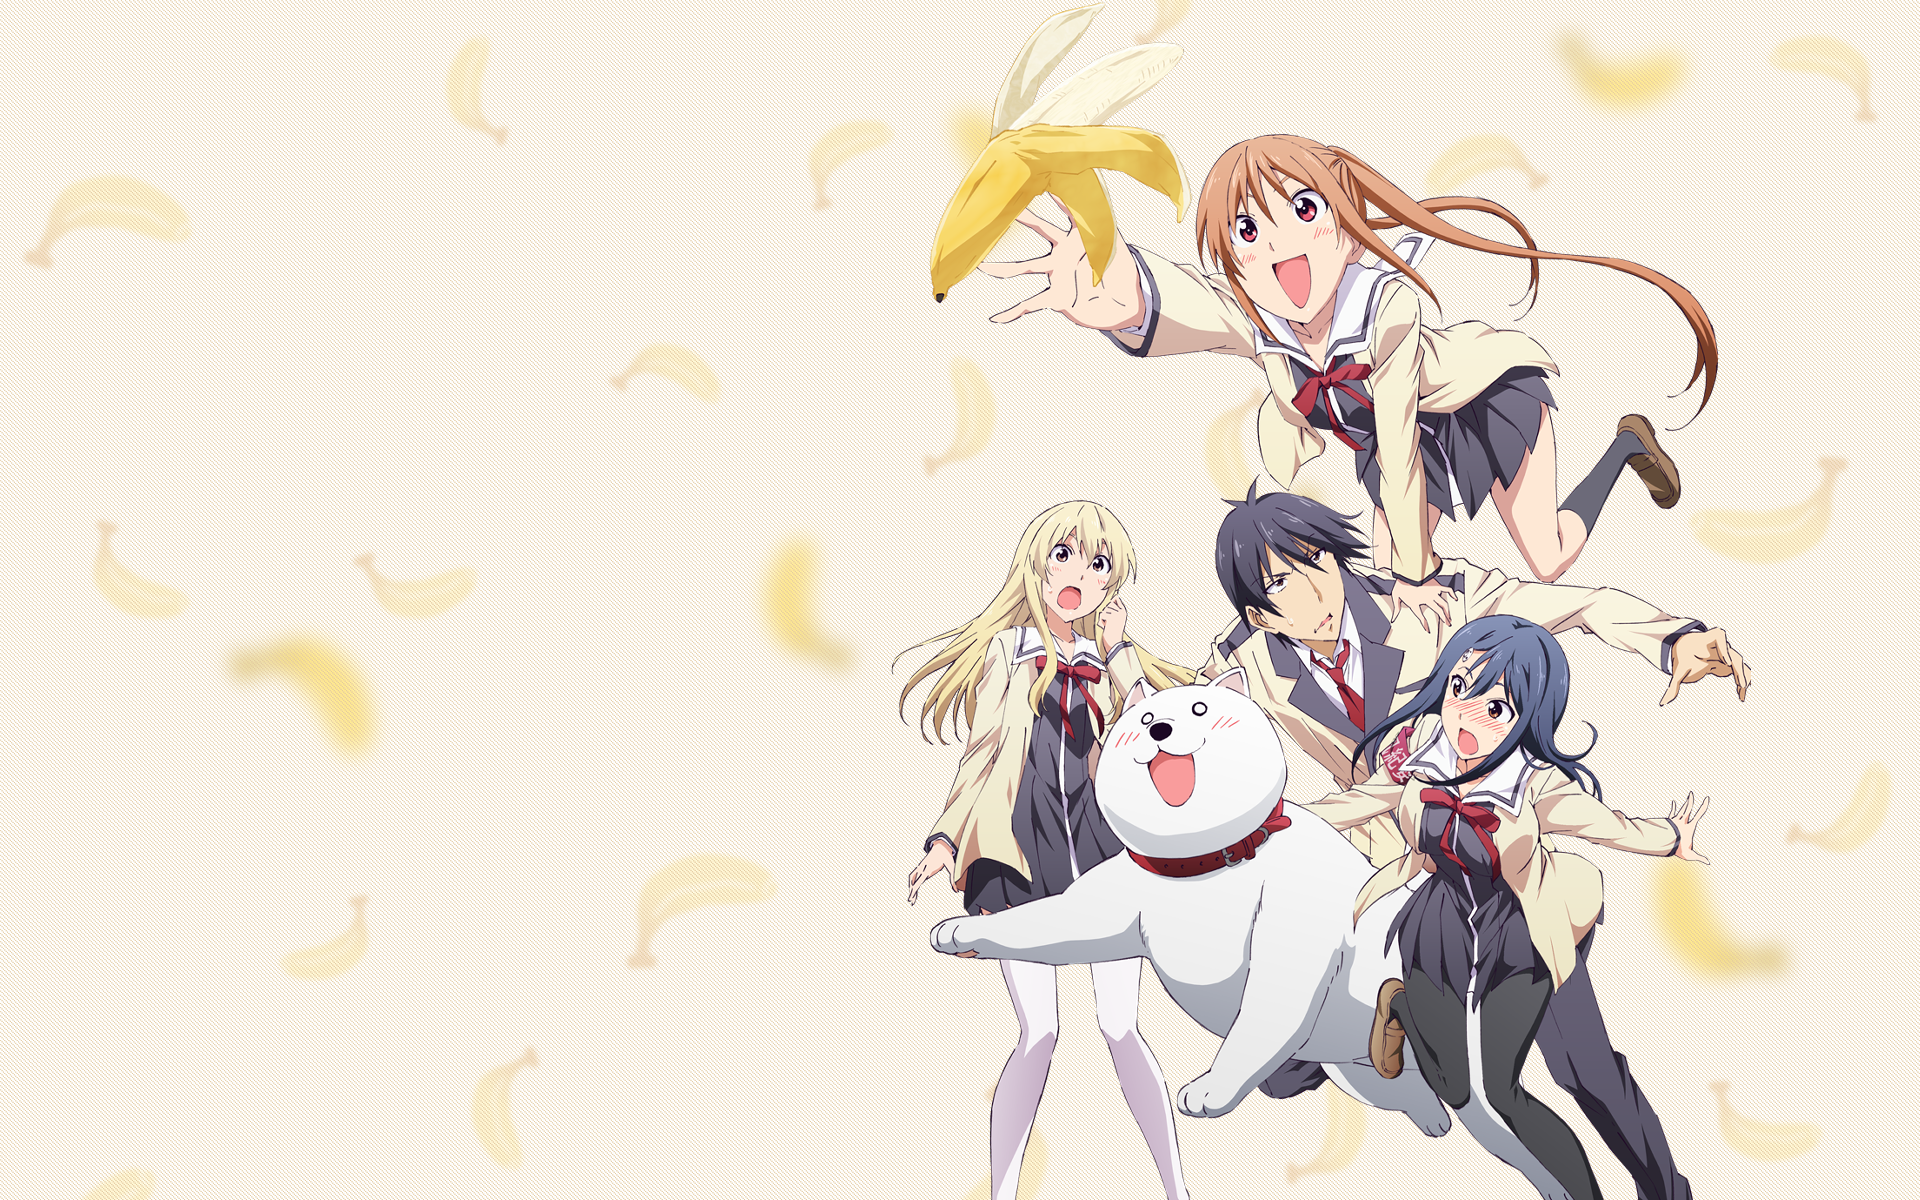 Aho Girl HD Wallpaper Background Image